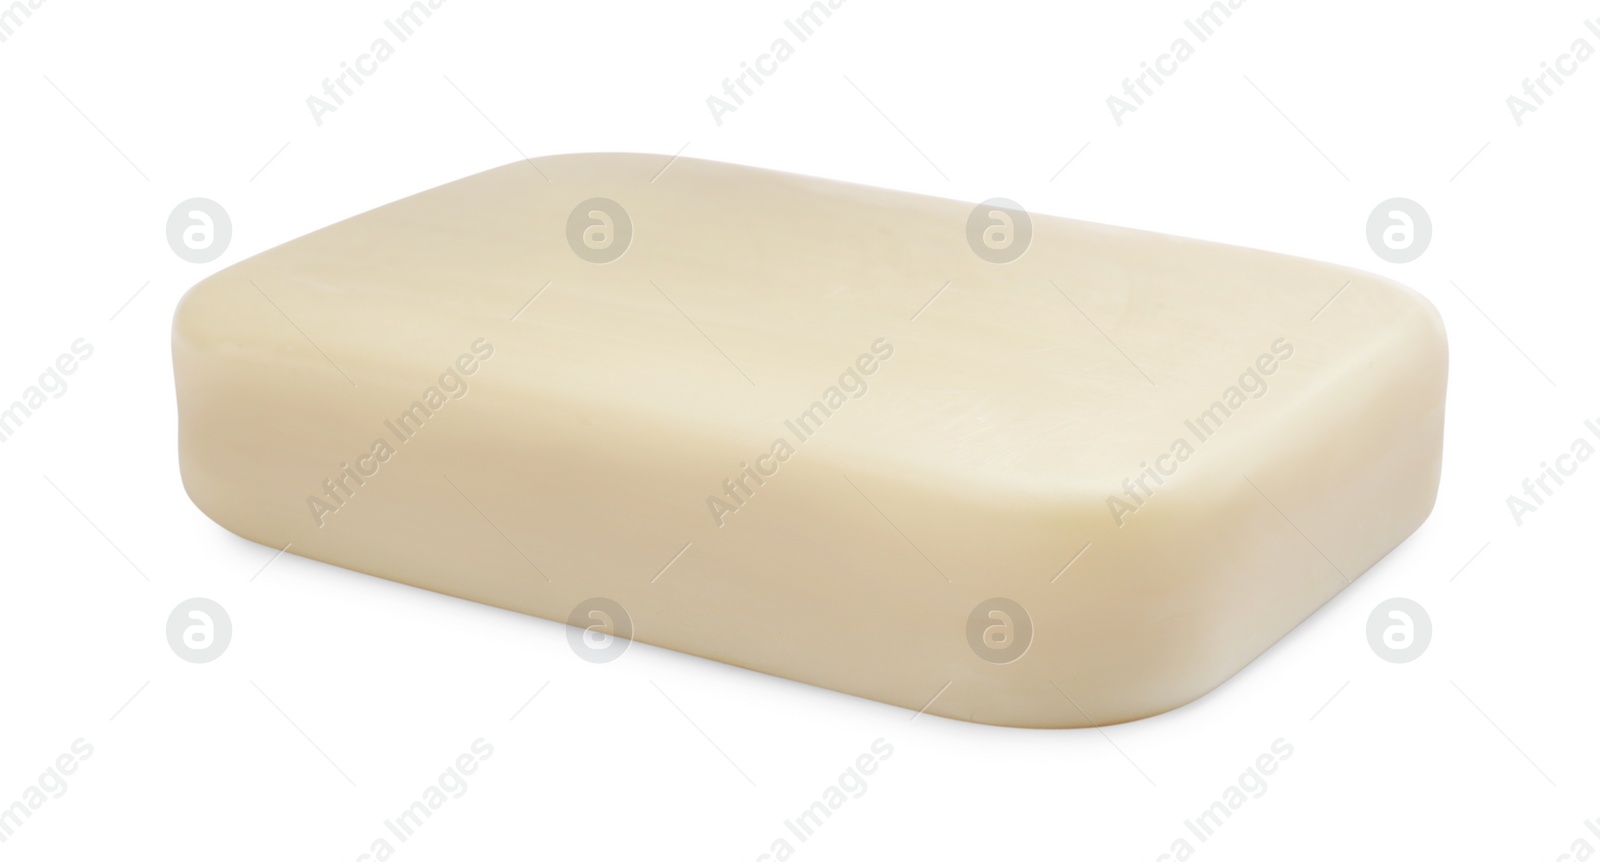 Photo of Soap bar on white background. Personal hygiene